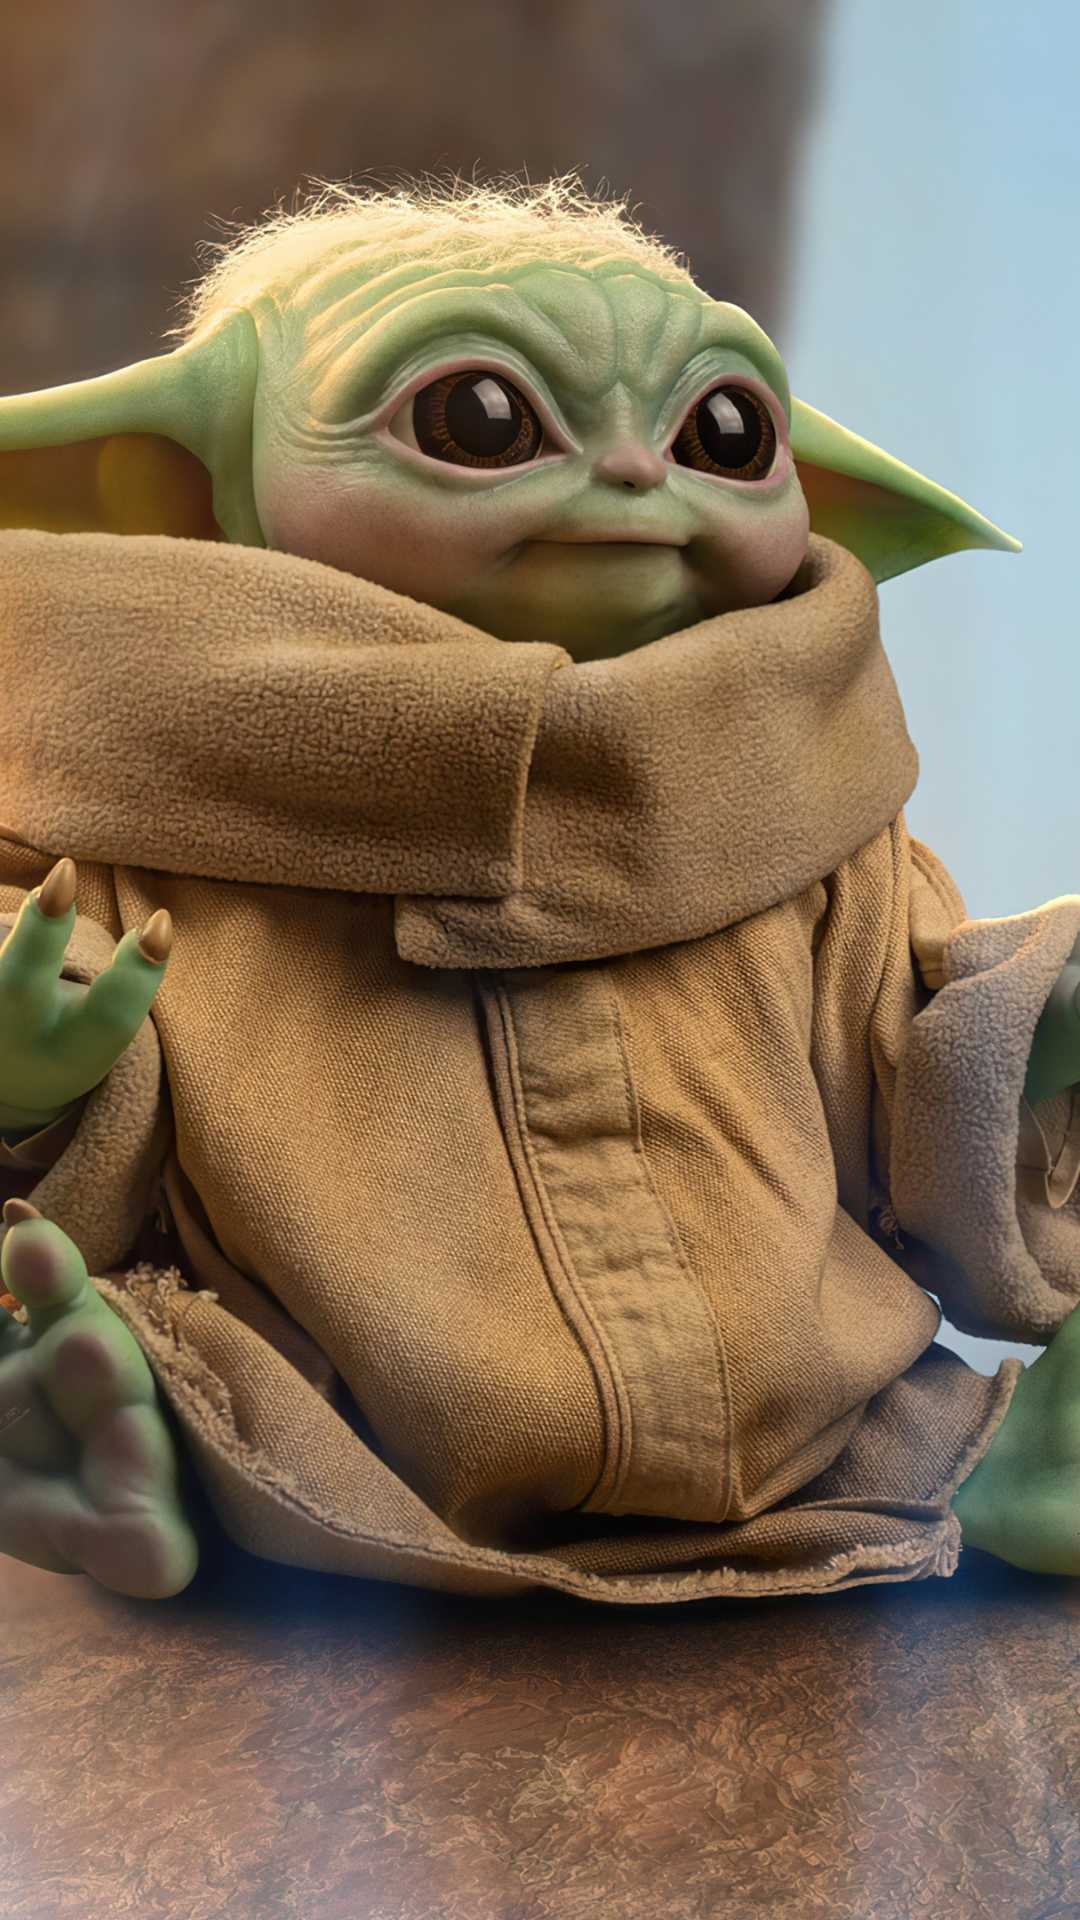 Baby Yoda wallpaper, Awesome design, Free HD wallpapers, Film character, 1080x1920 Full HD Handy